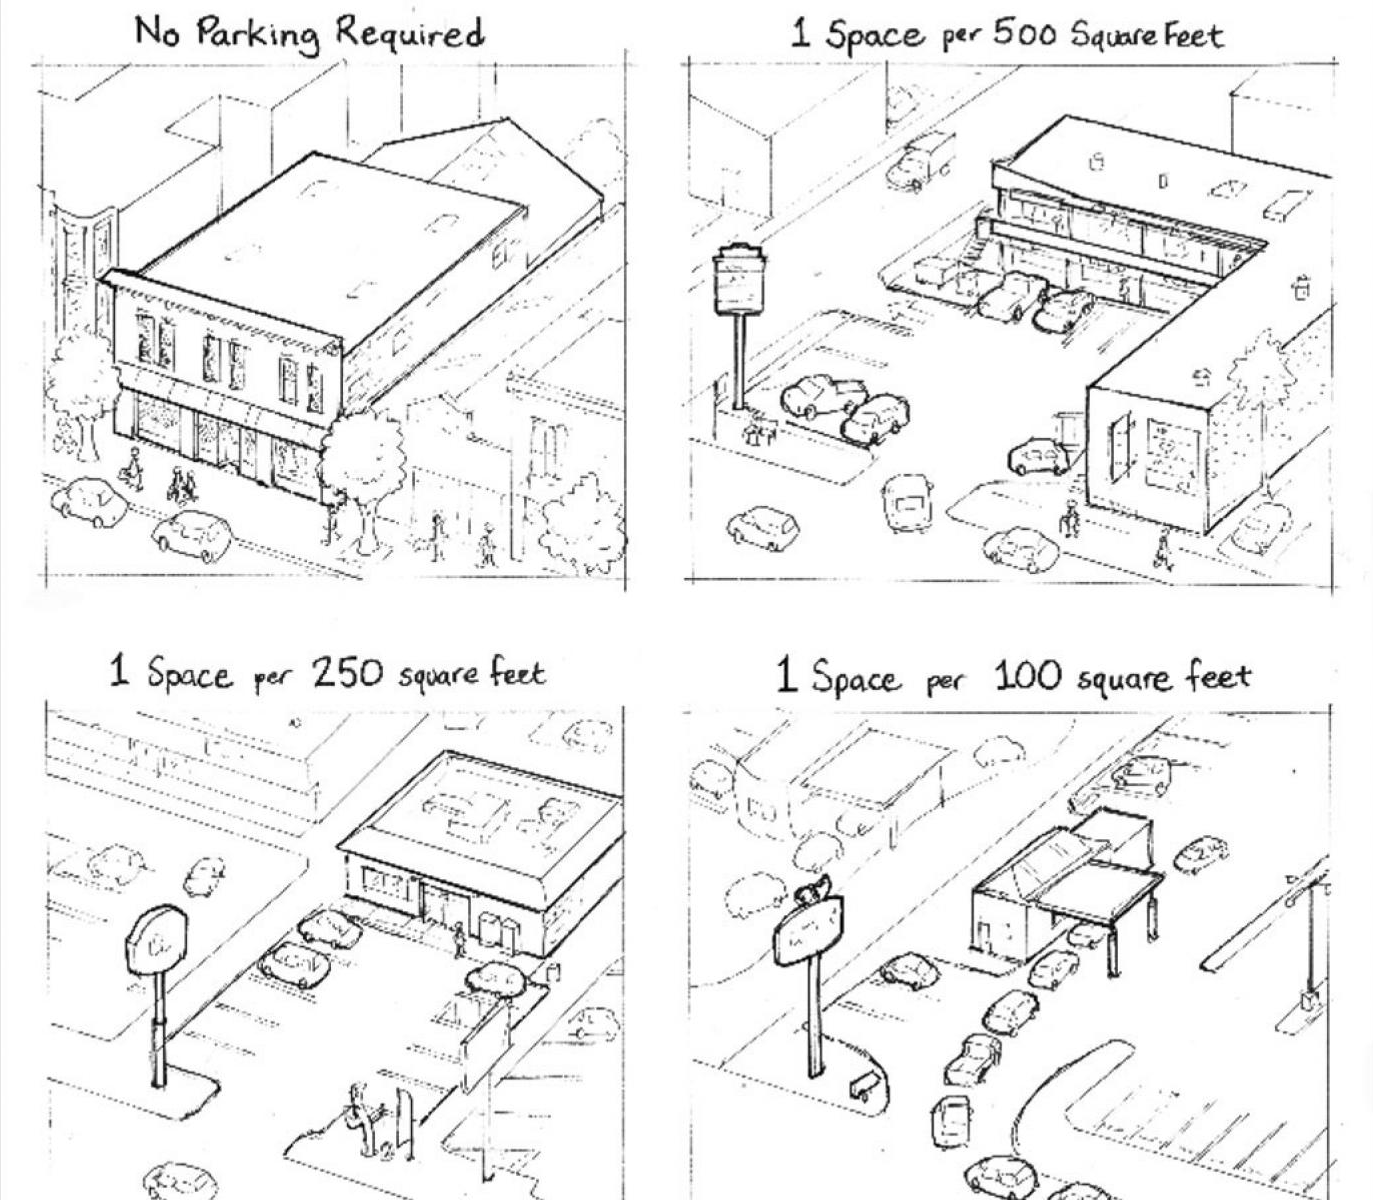 Alfred Twu illustrations from Paved Paradise show the impact of various levels of parking requirements on urban form.